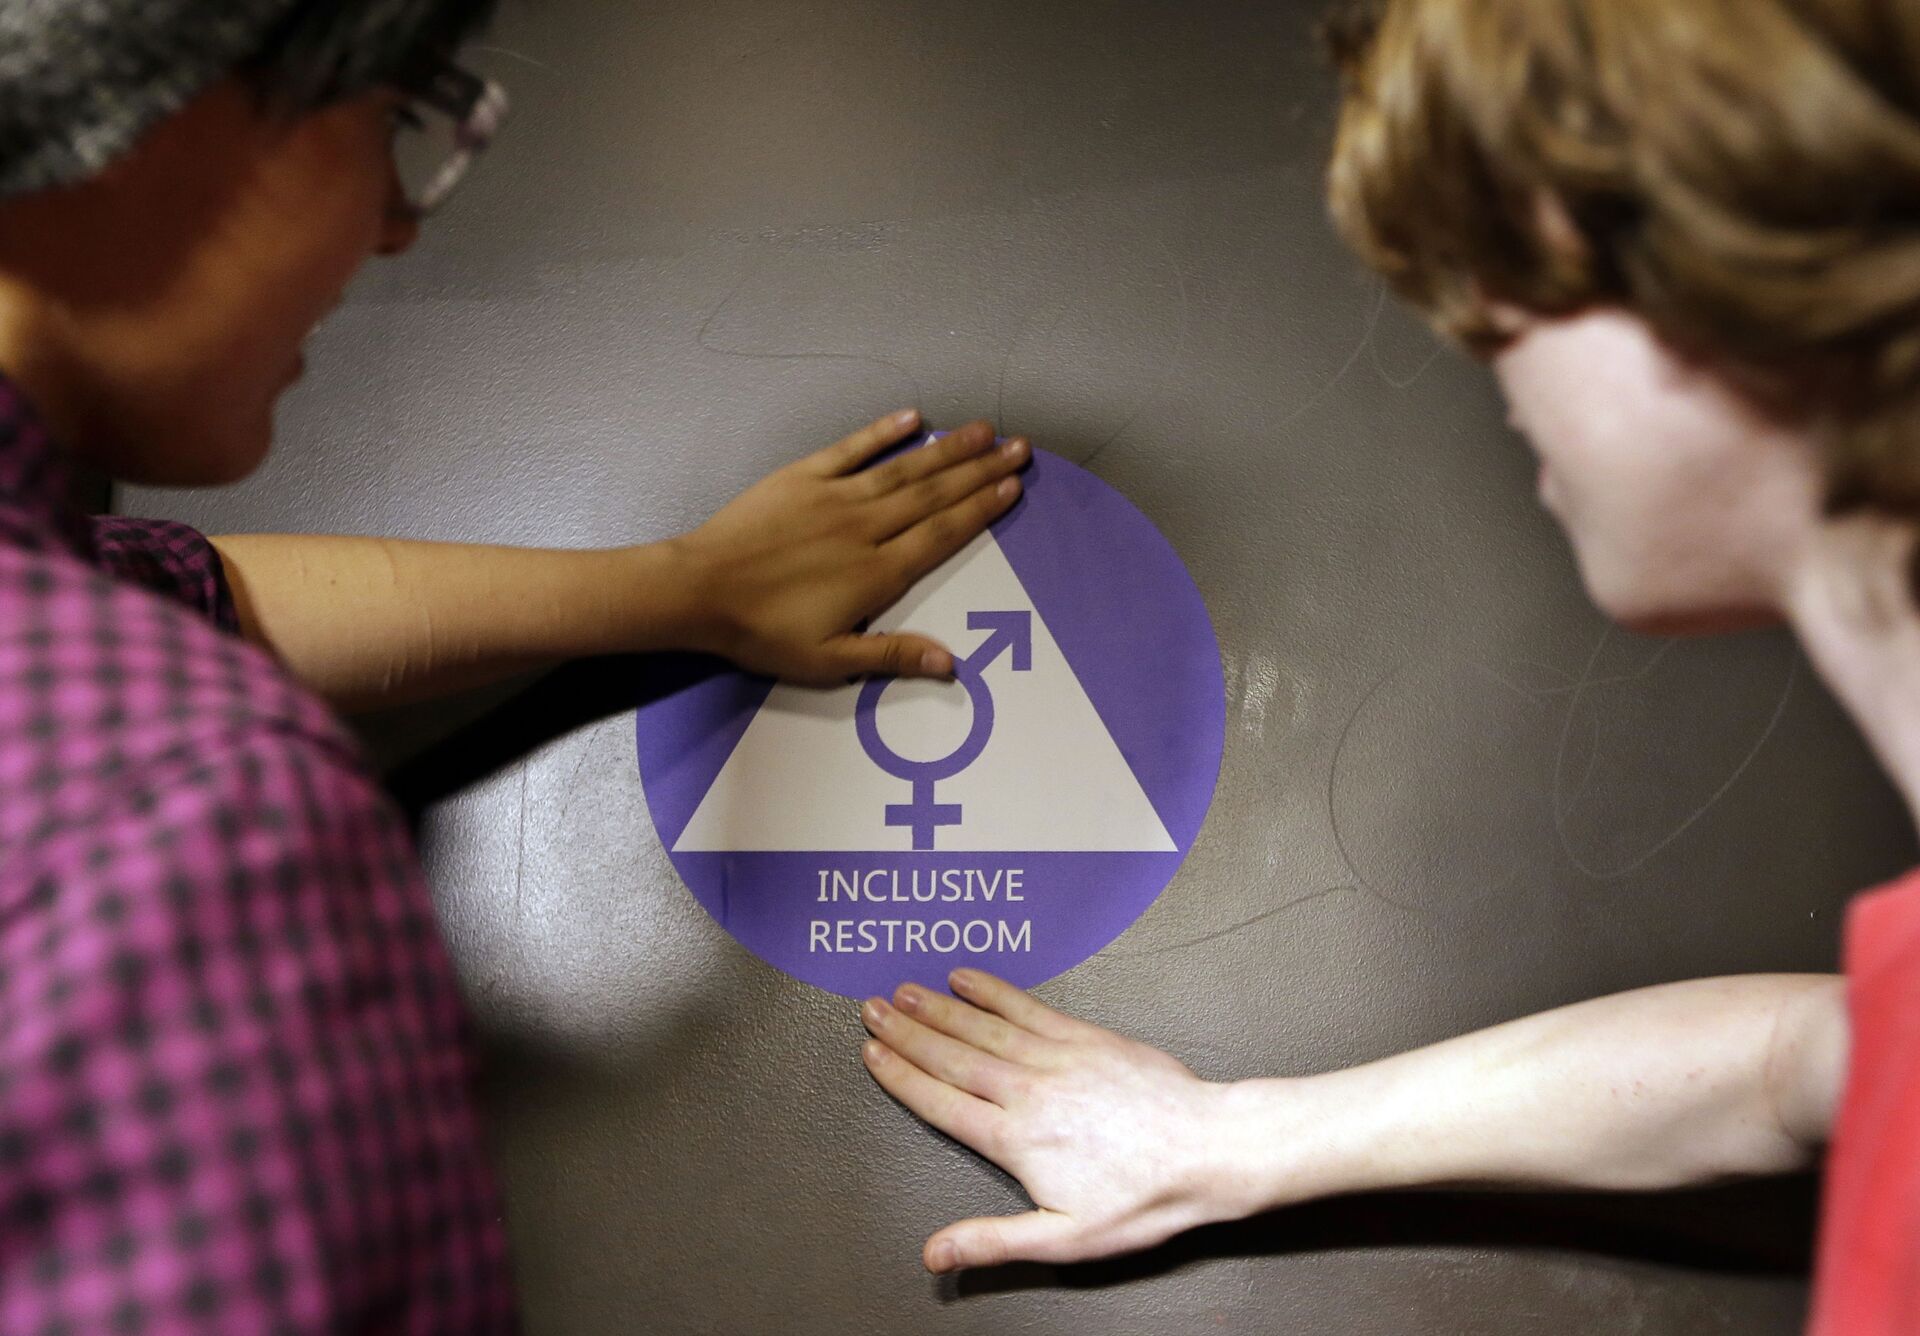 Destin Cramer, left, and Noah Rice place a new sticker on the door at the ceremonial opening of a gender neutral bathroom at Nathan Hale high school Tuesday, May 17, 2016, in Seattle - Sputnik International, 1920, 18.09.2021